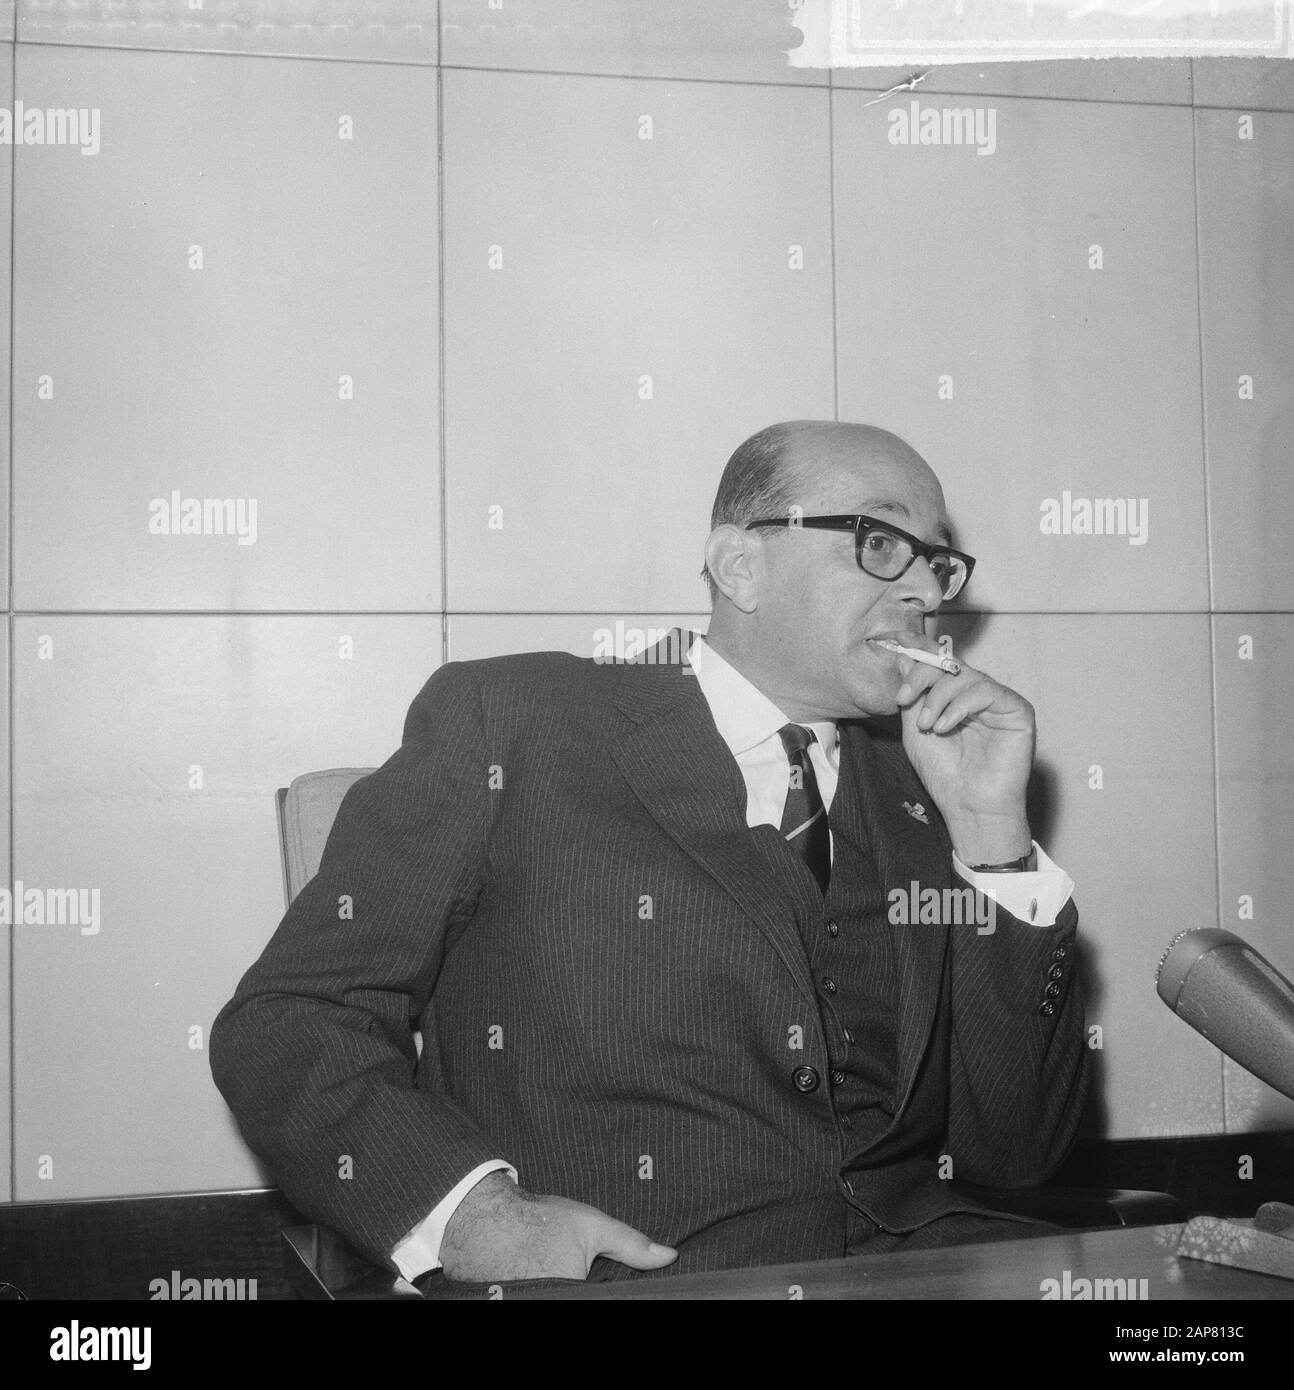 Arrival of mr. De Vries, the newly appointed governor of Suriname at Schiphol Airport. He will be sworn in in the Netherlands. Mr. de Vries during press conference Date: 15 February 1965 Location: Noord-Holland, Schiphol Keywords: arrivals, governors, overseas territories, press conferences Stock Photo